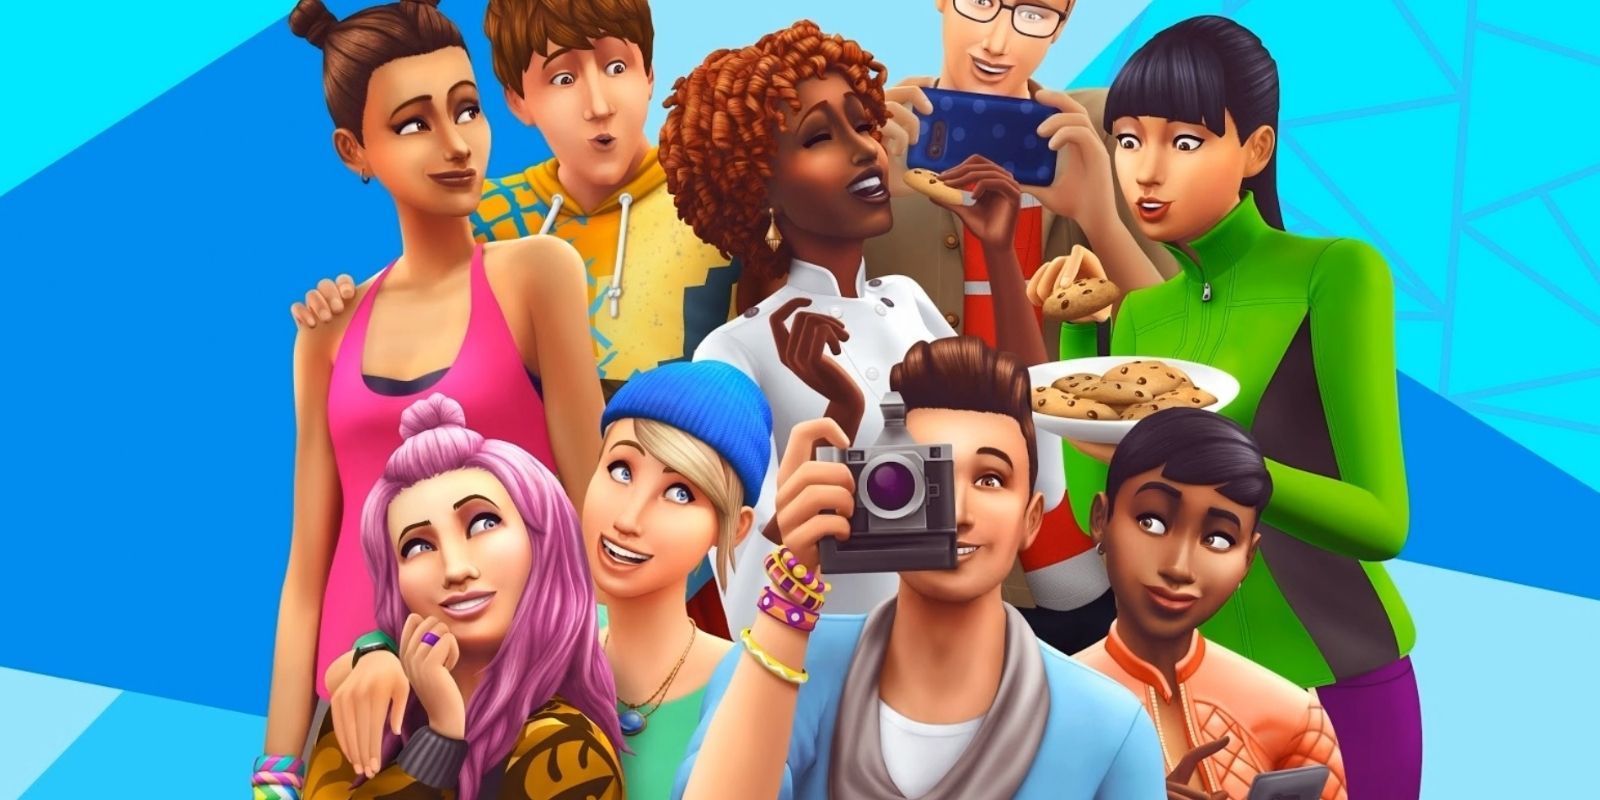 A collection of Sims taking pictures, eating cookies and laughing